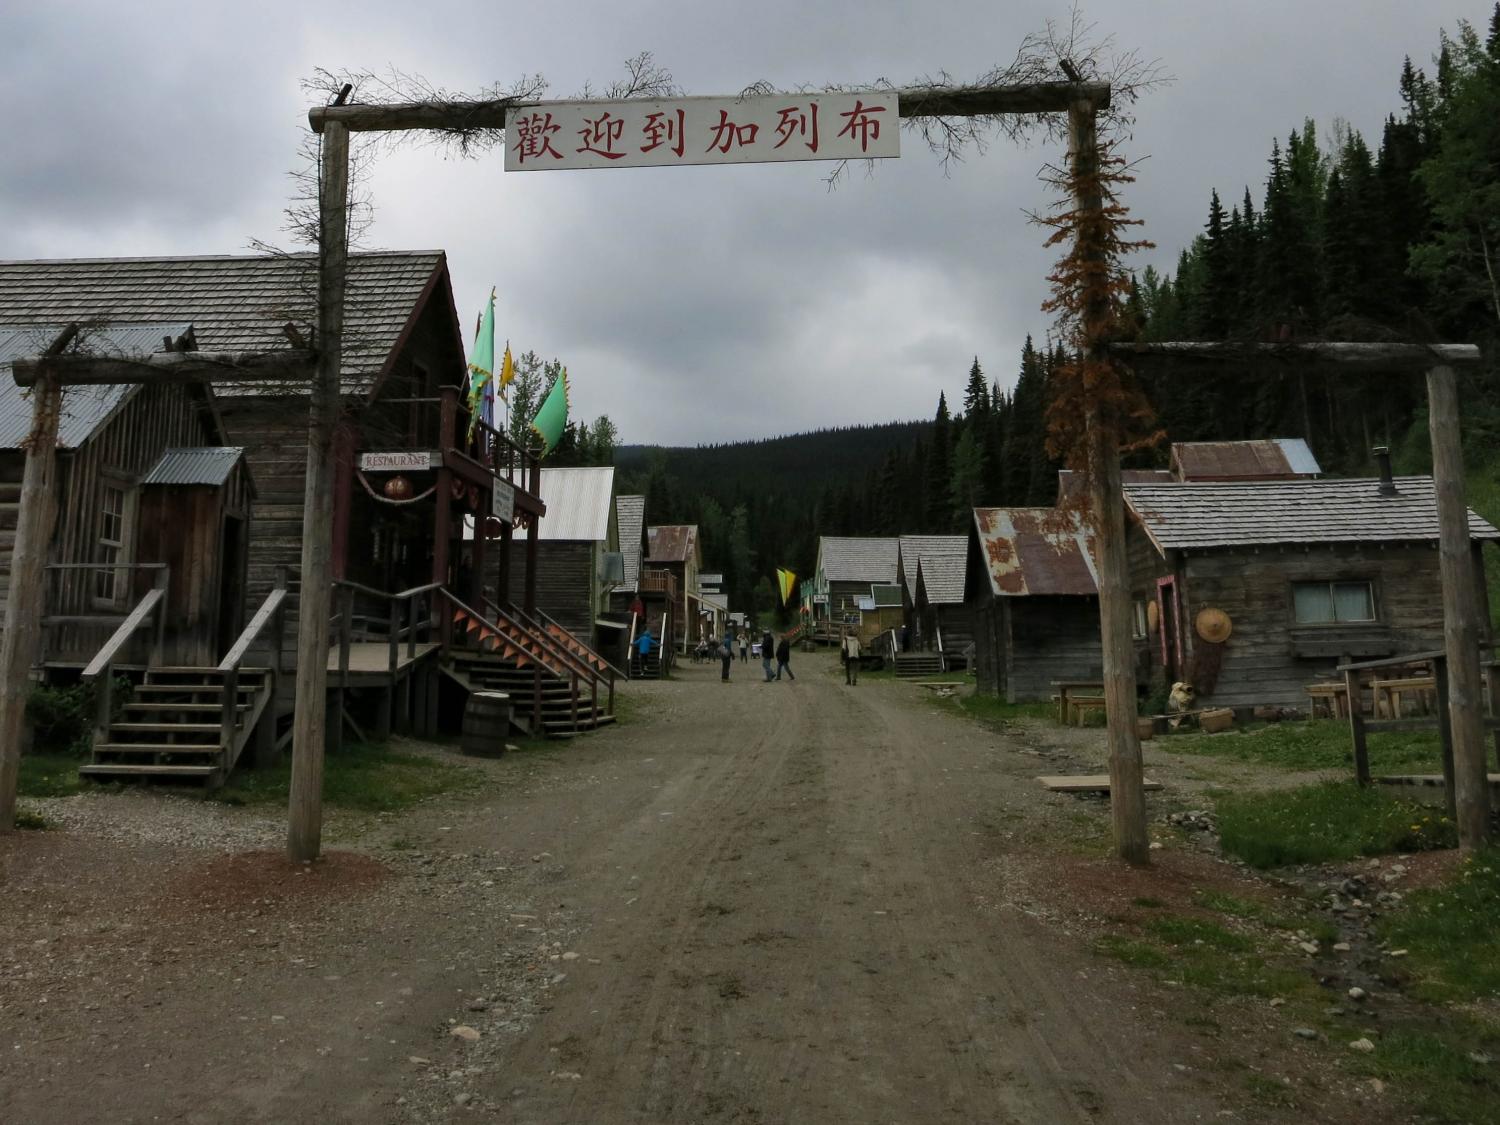 The entrance to Barkerville's Chinatown